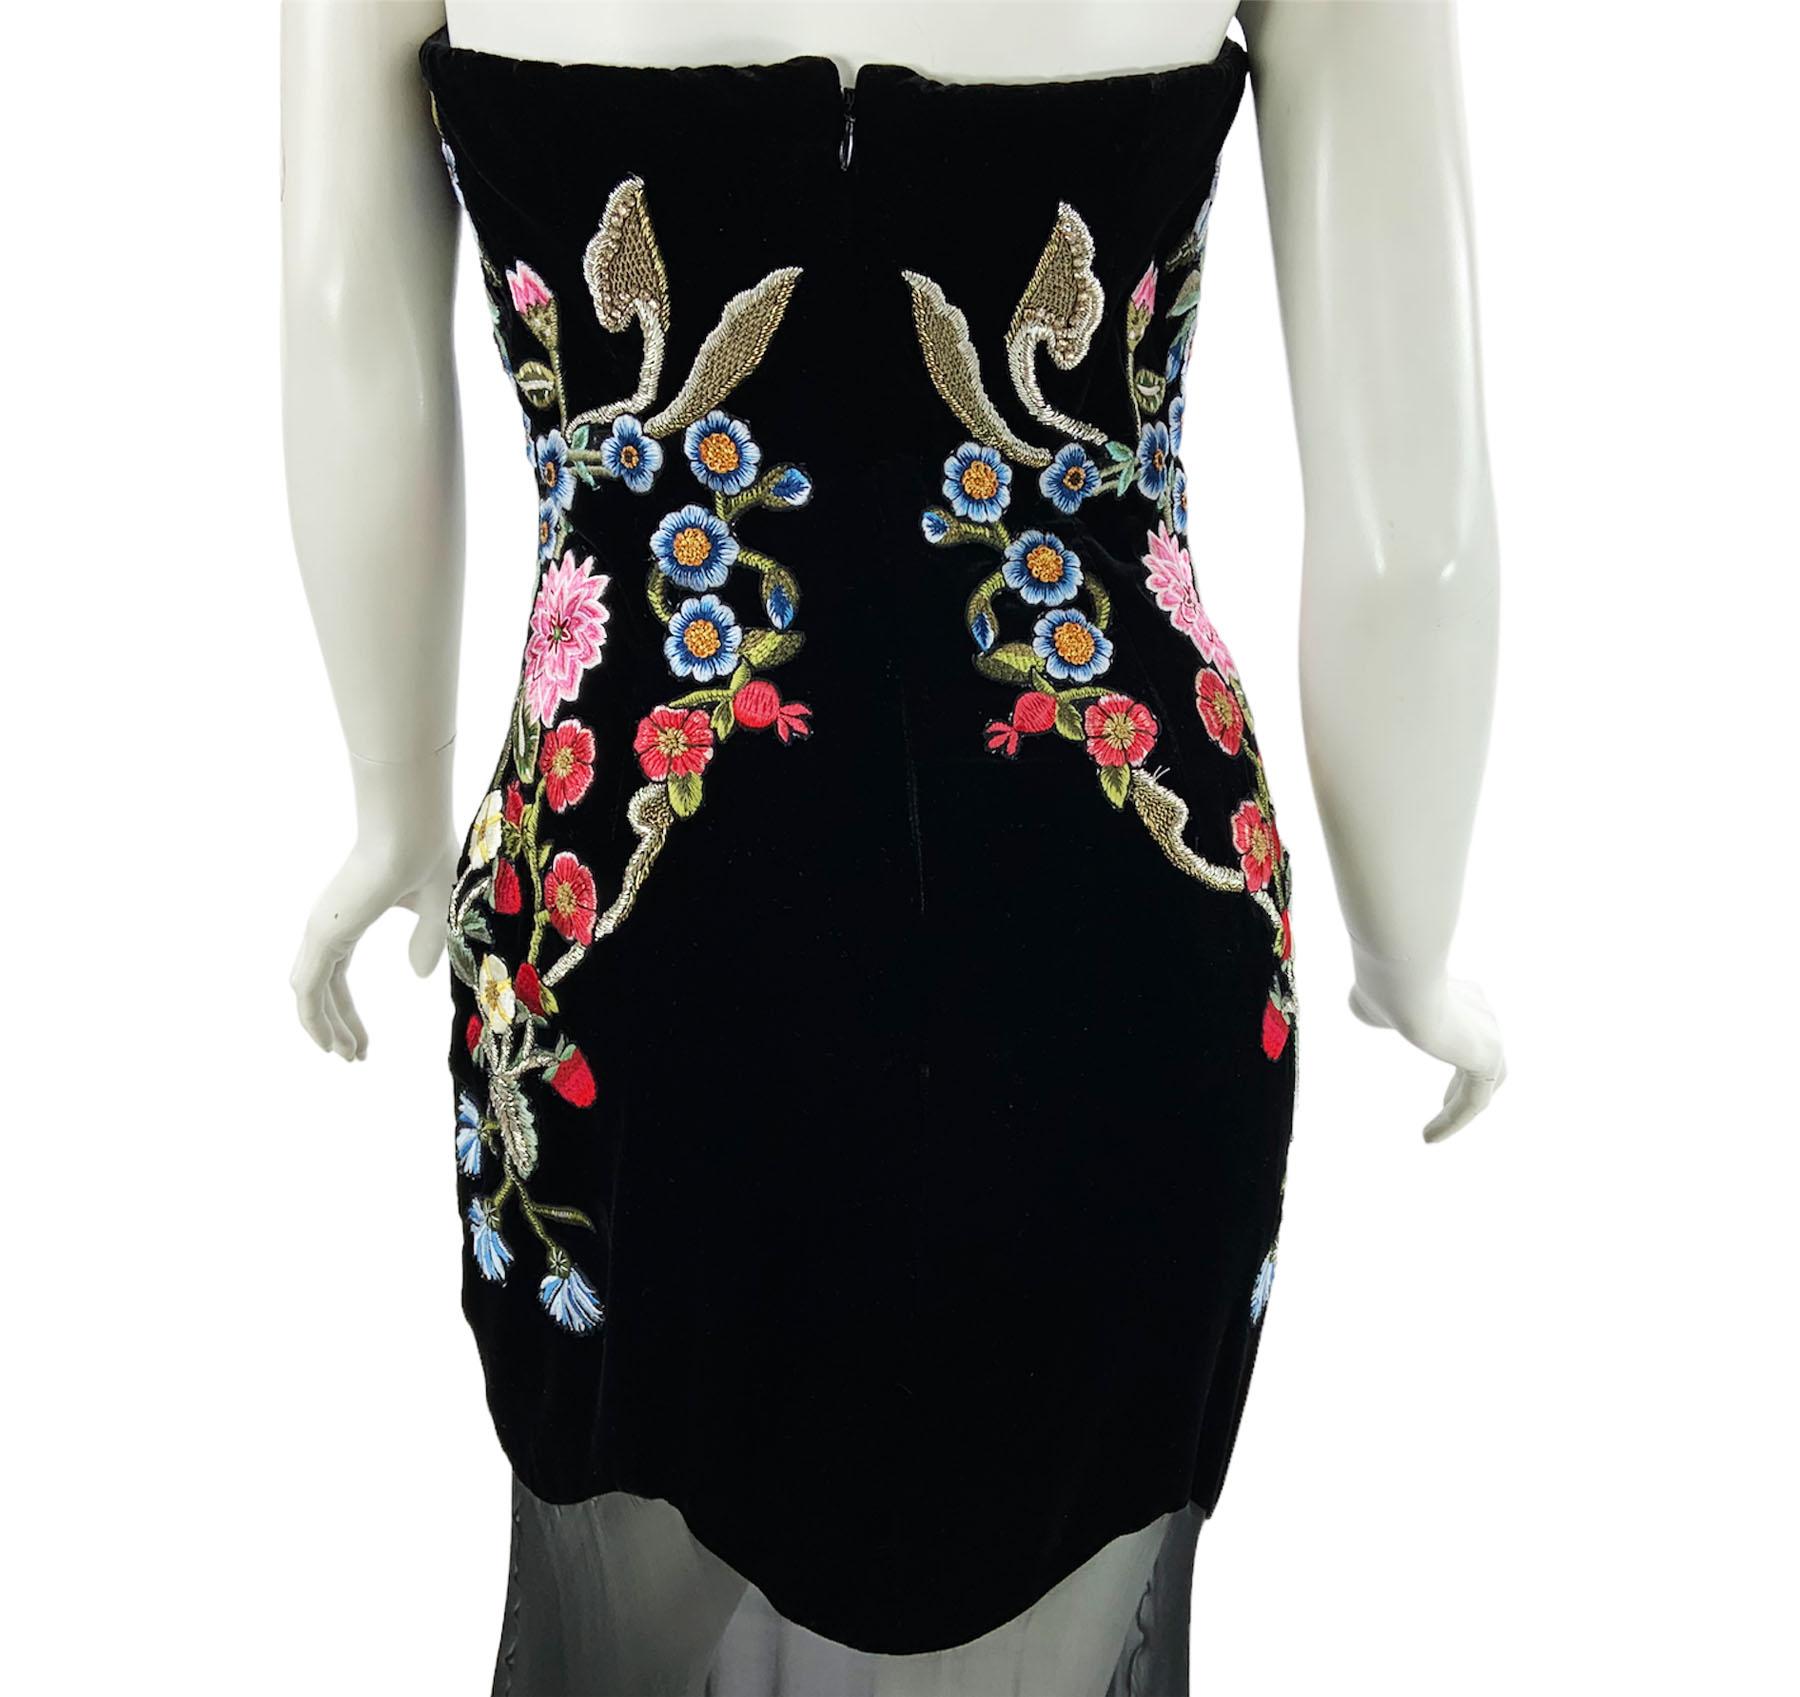 Alexander McQueen Black Velvet Chiffon Medieval Embroidery Corset Dress Gown 42 For Sale 2